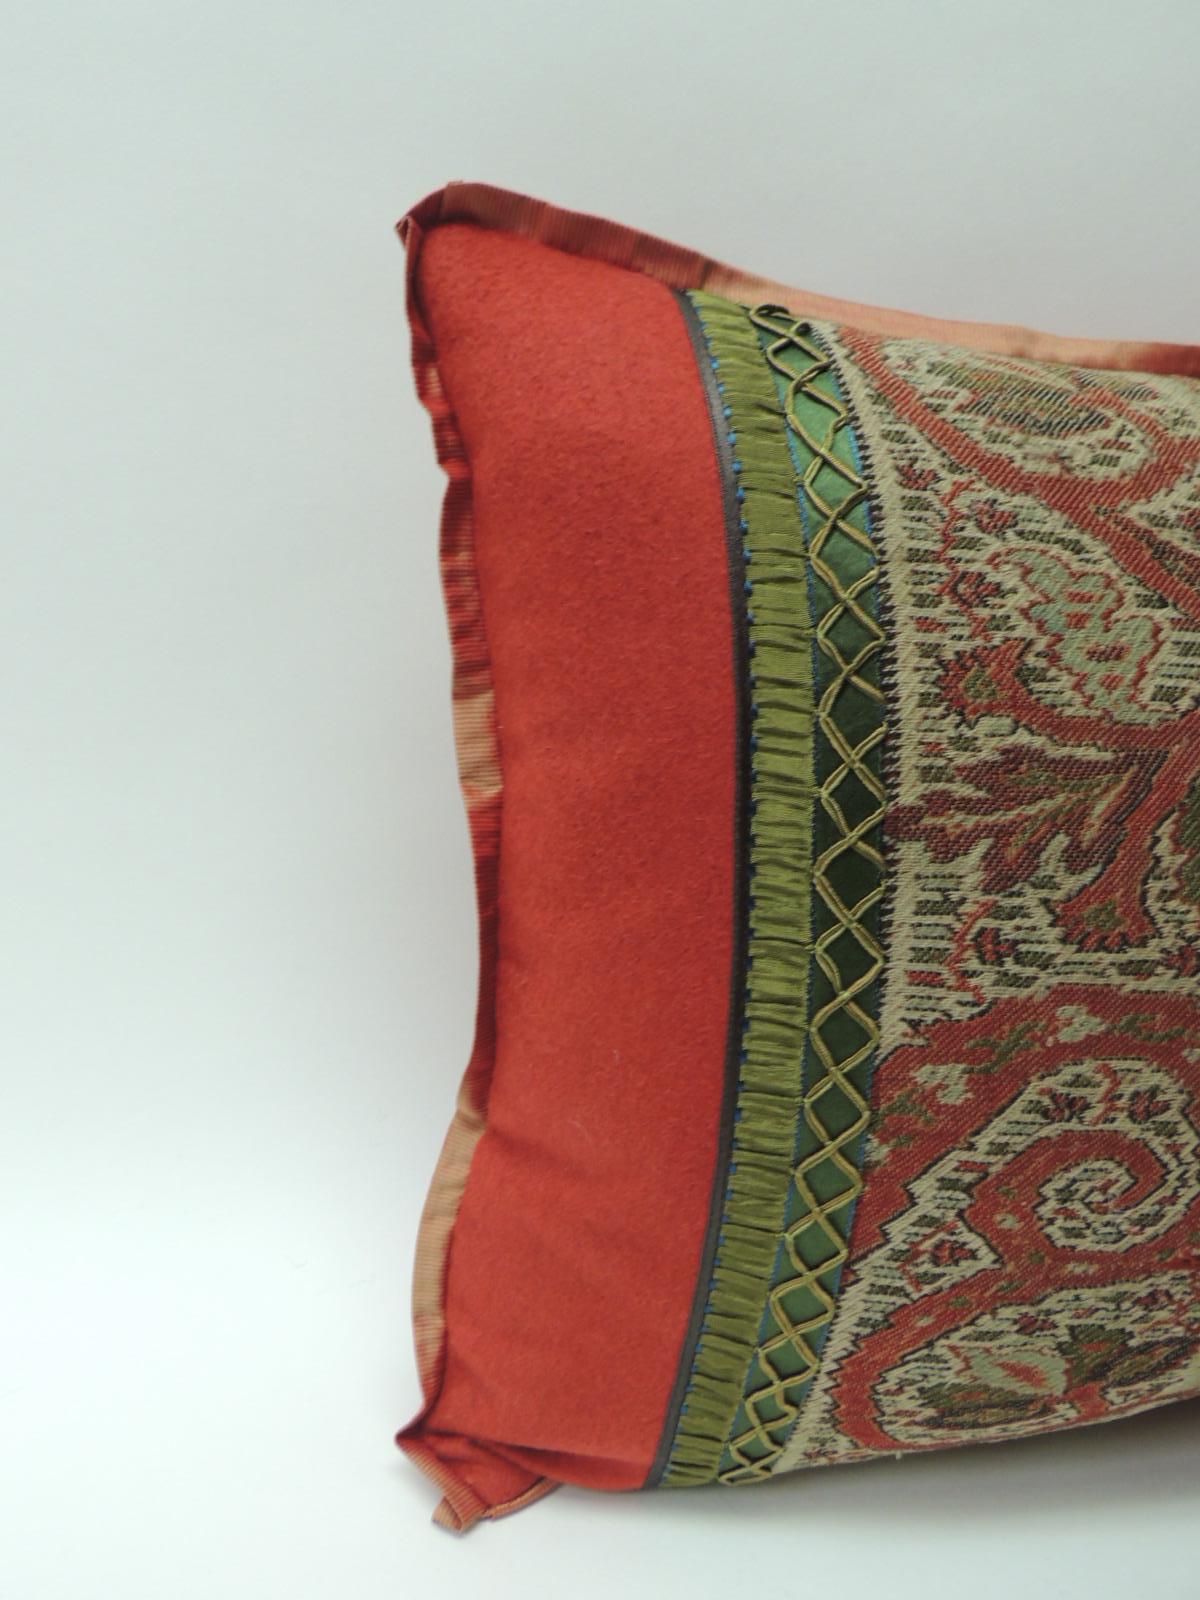 Antique red and black Kashmir Paisley Lumbar decorative pillow
Embellished with green woven braid trim frame with red wool, ATG
custom flat red silk trim and ren wool backing.
Decorative pillow handcrafted and designed in the USA. 
Closure by